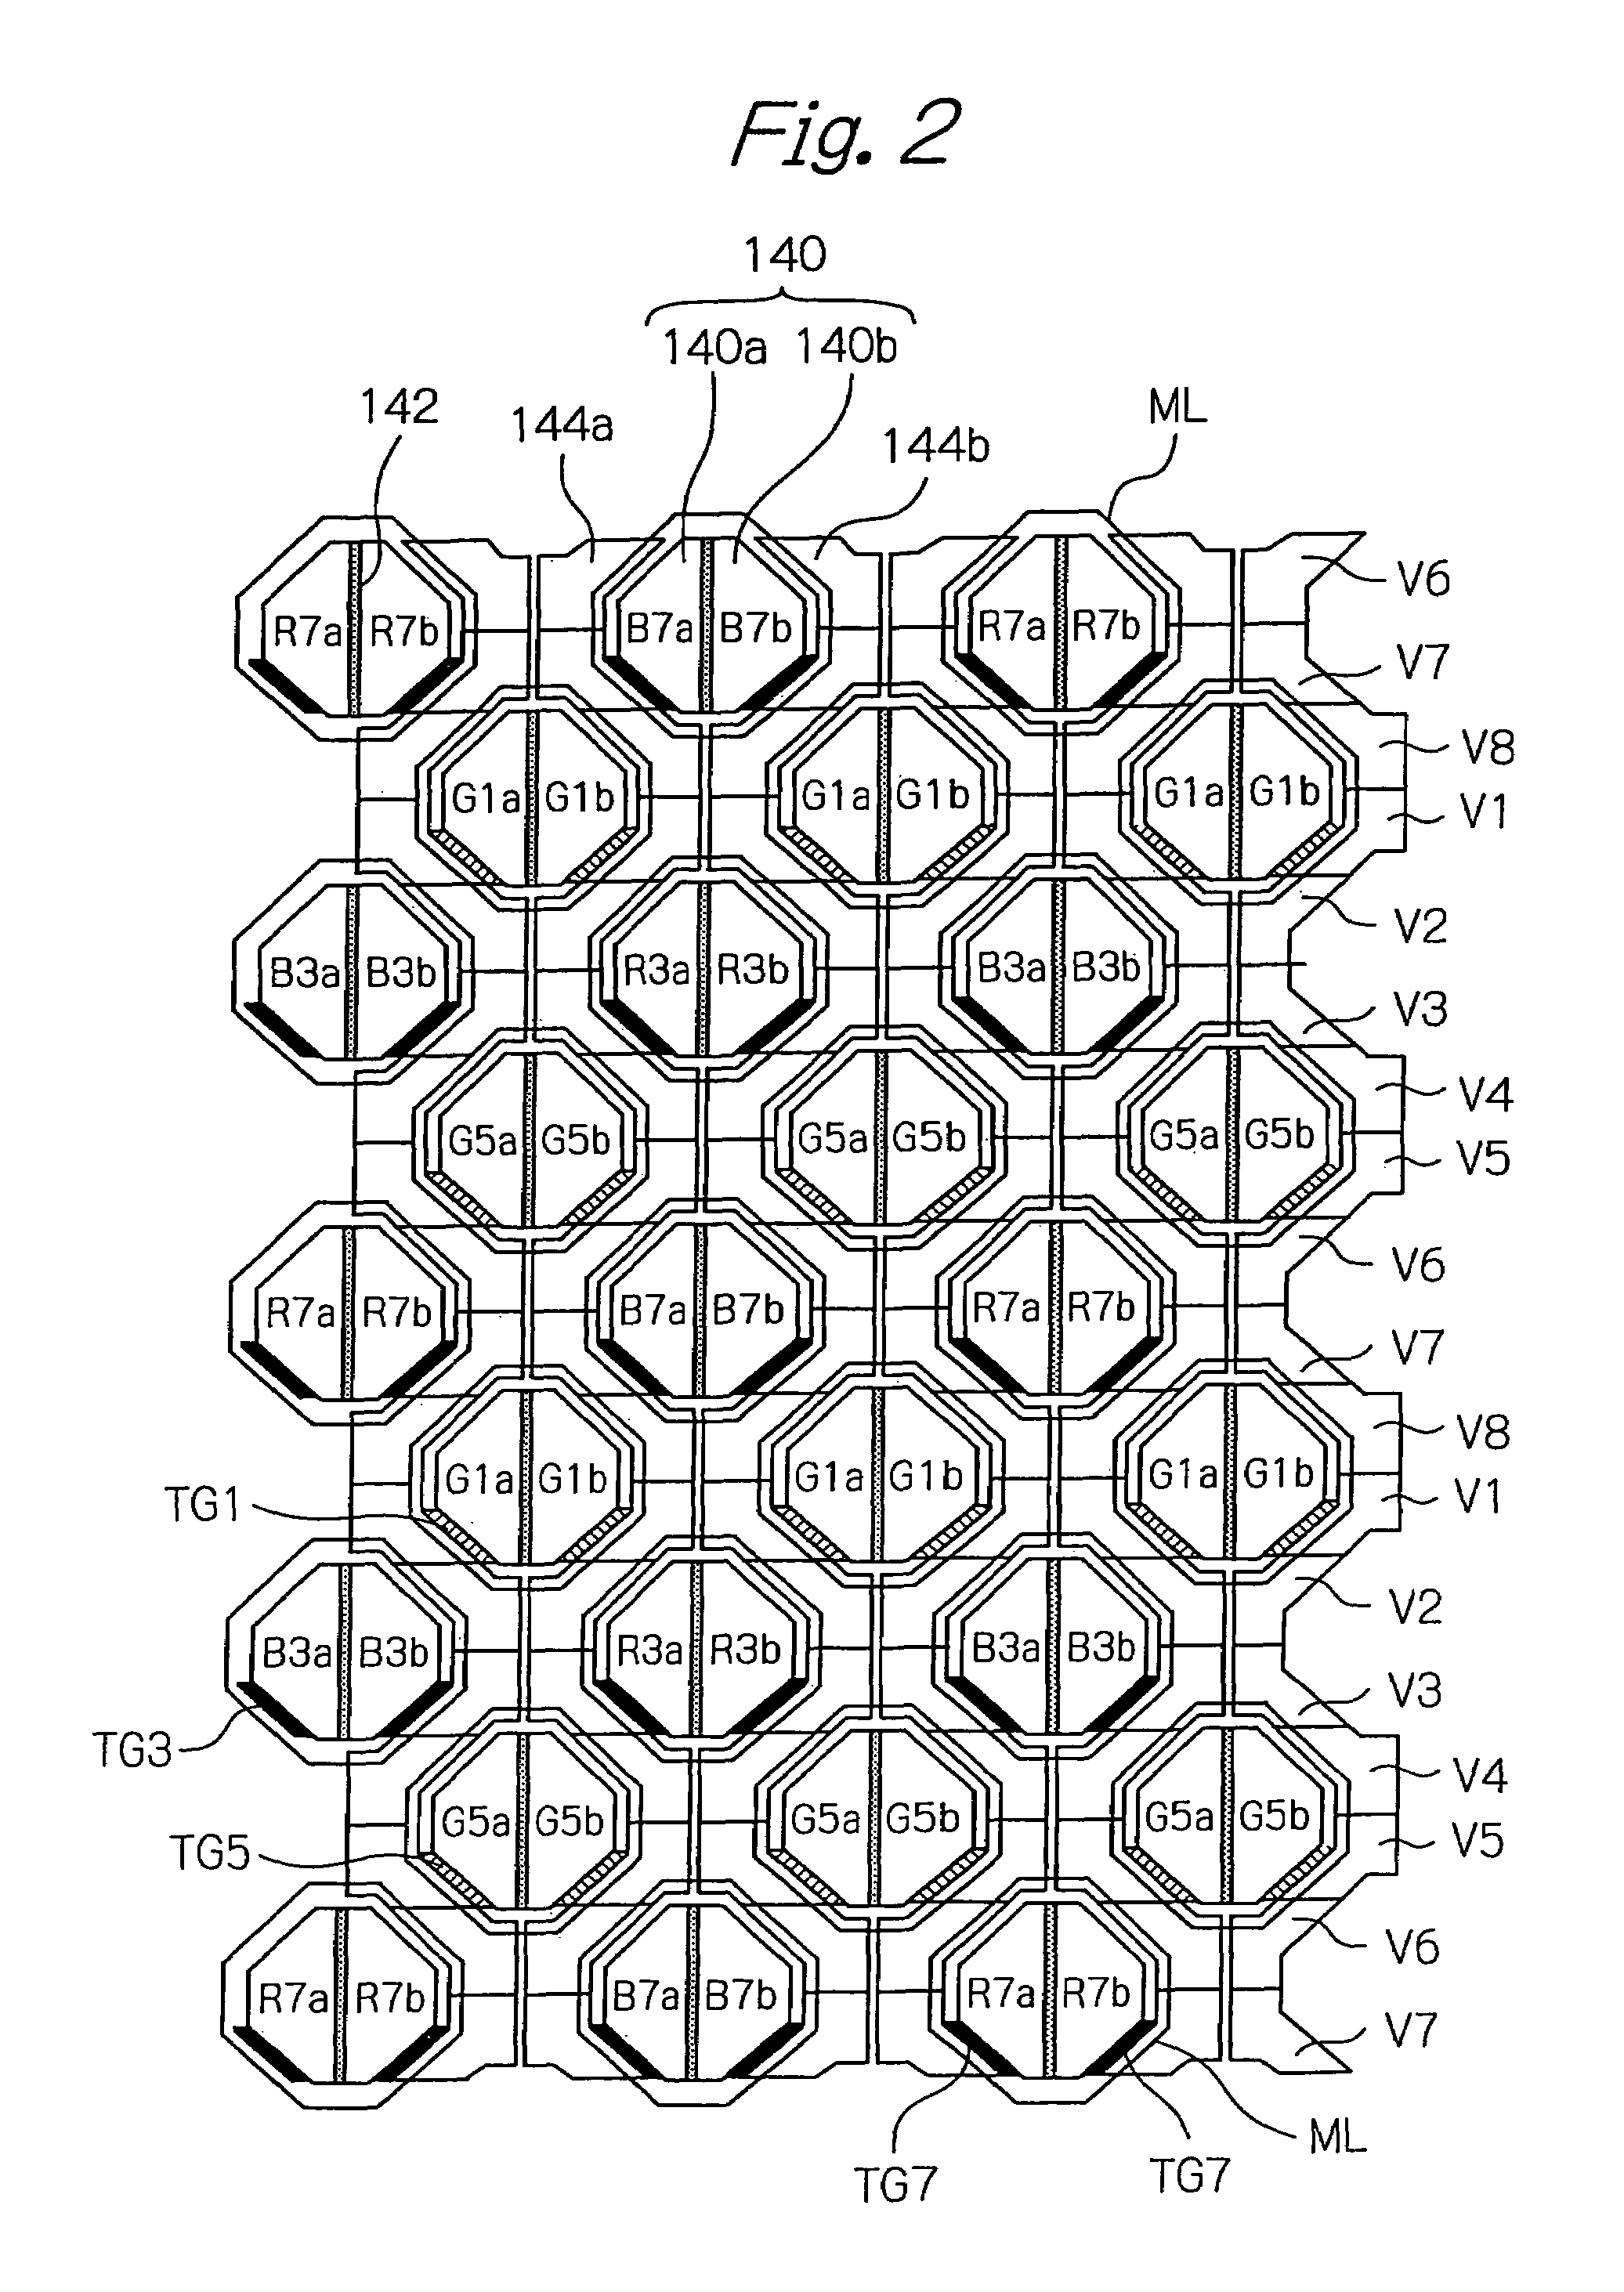 Image pickup apparatus including photosensitive cells each having photosensitive regions partitioned